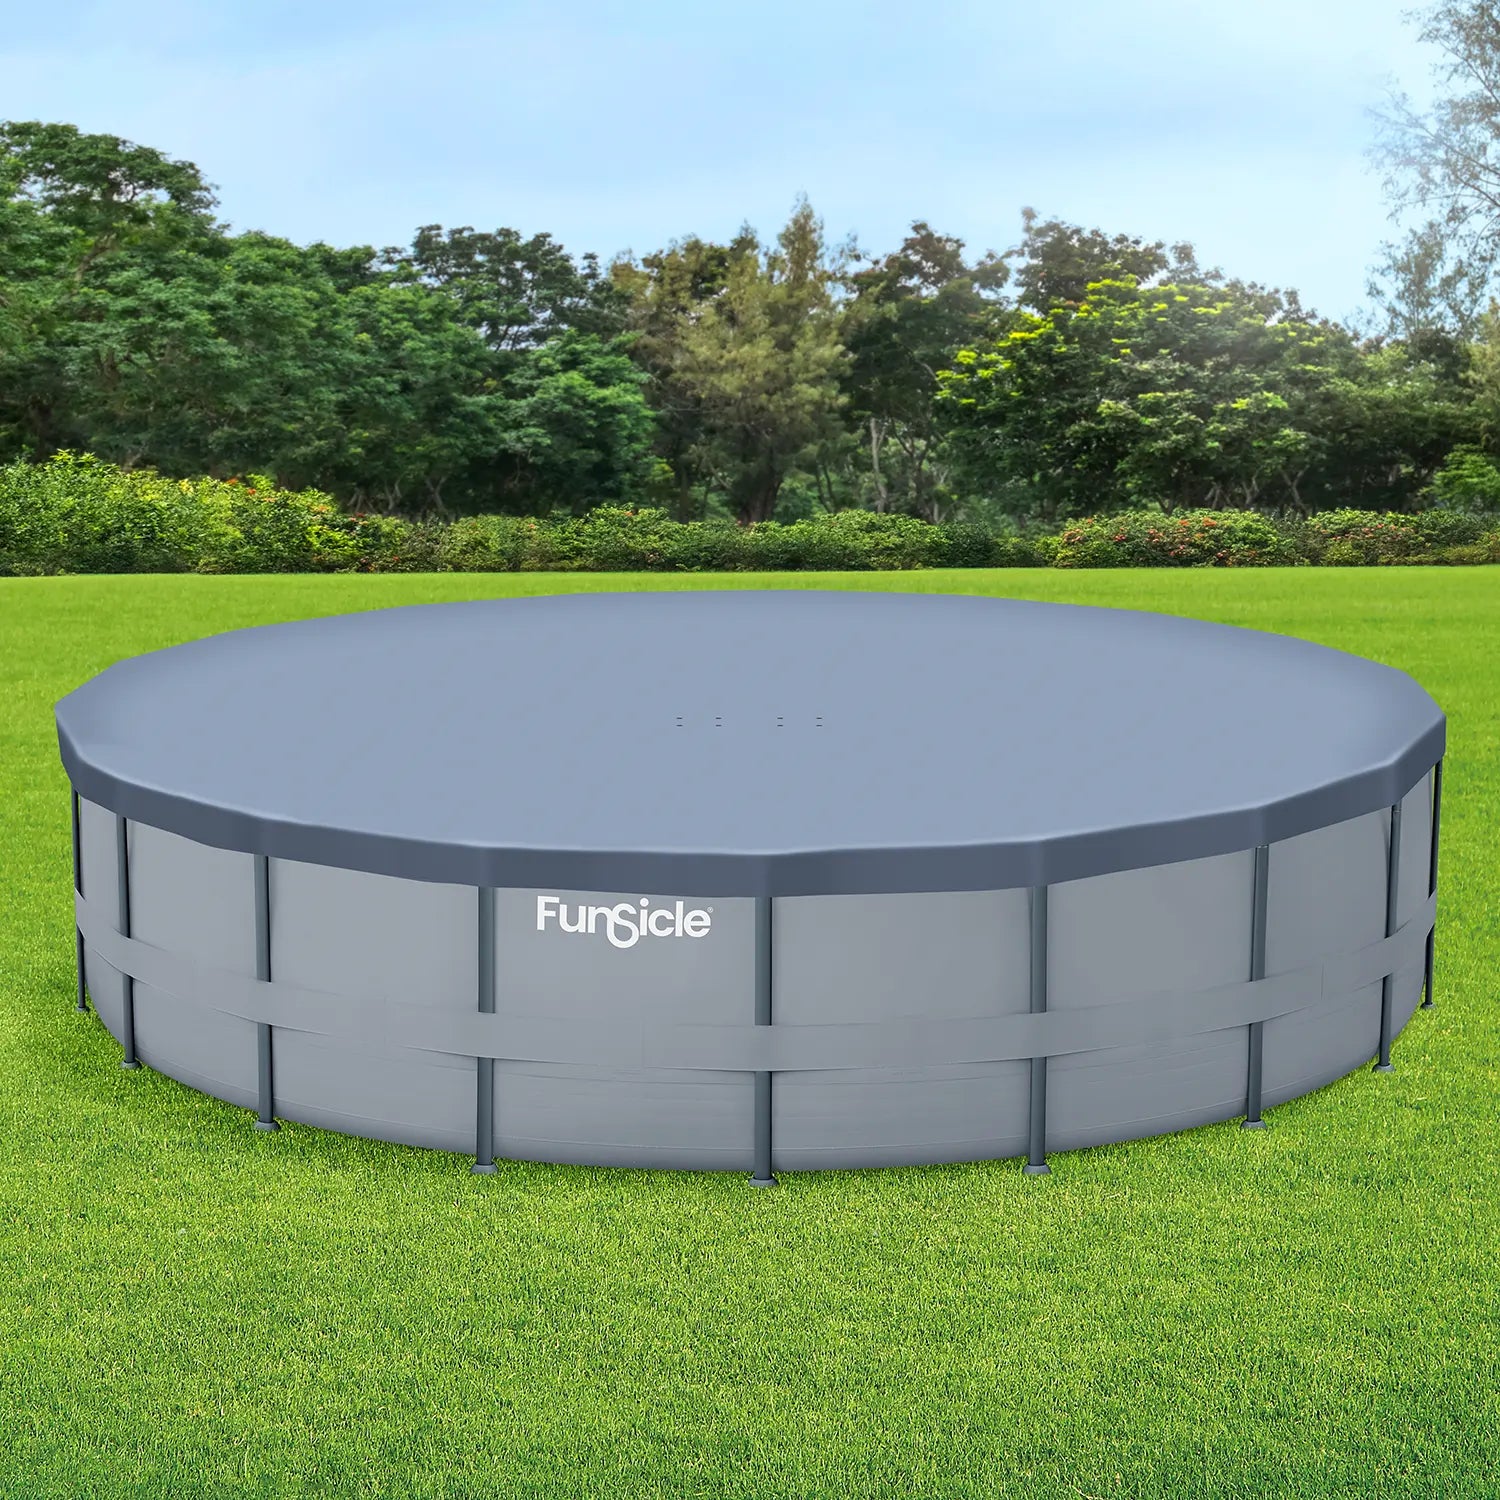 Funsicle 26ft Frame Pool Cover with Funsicle Oasis Pool on a grass background